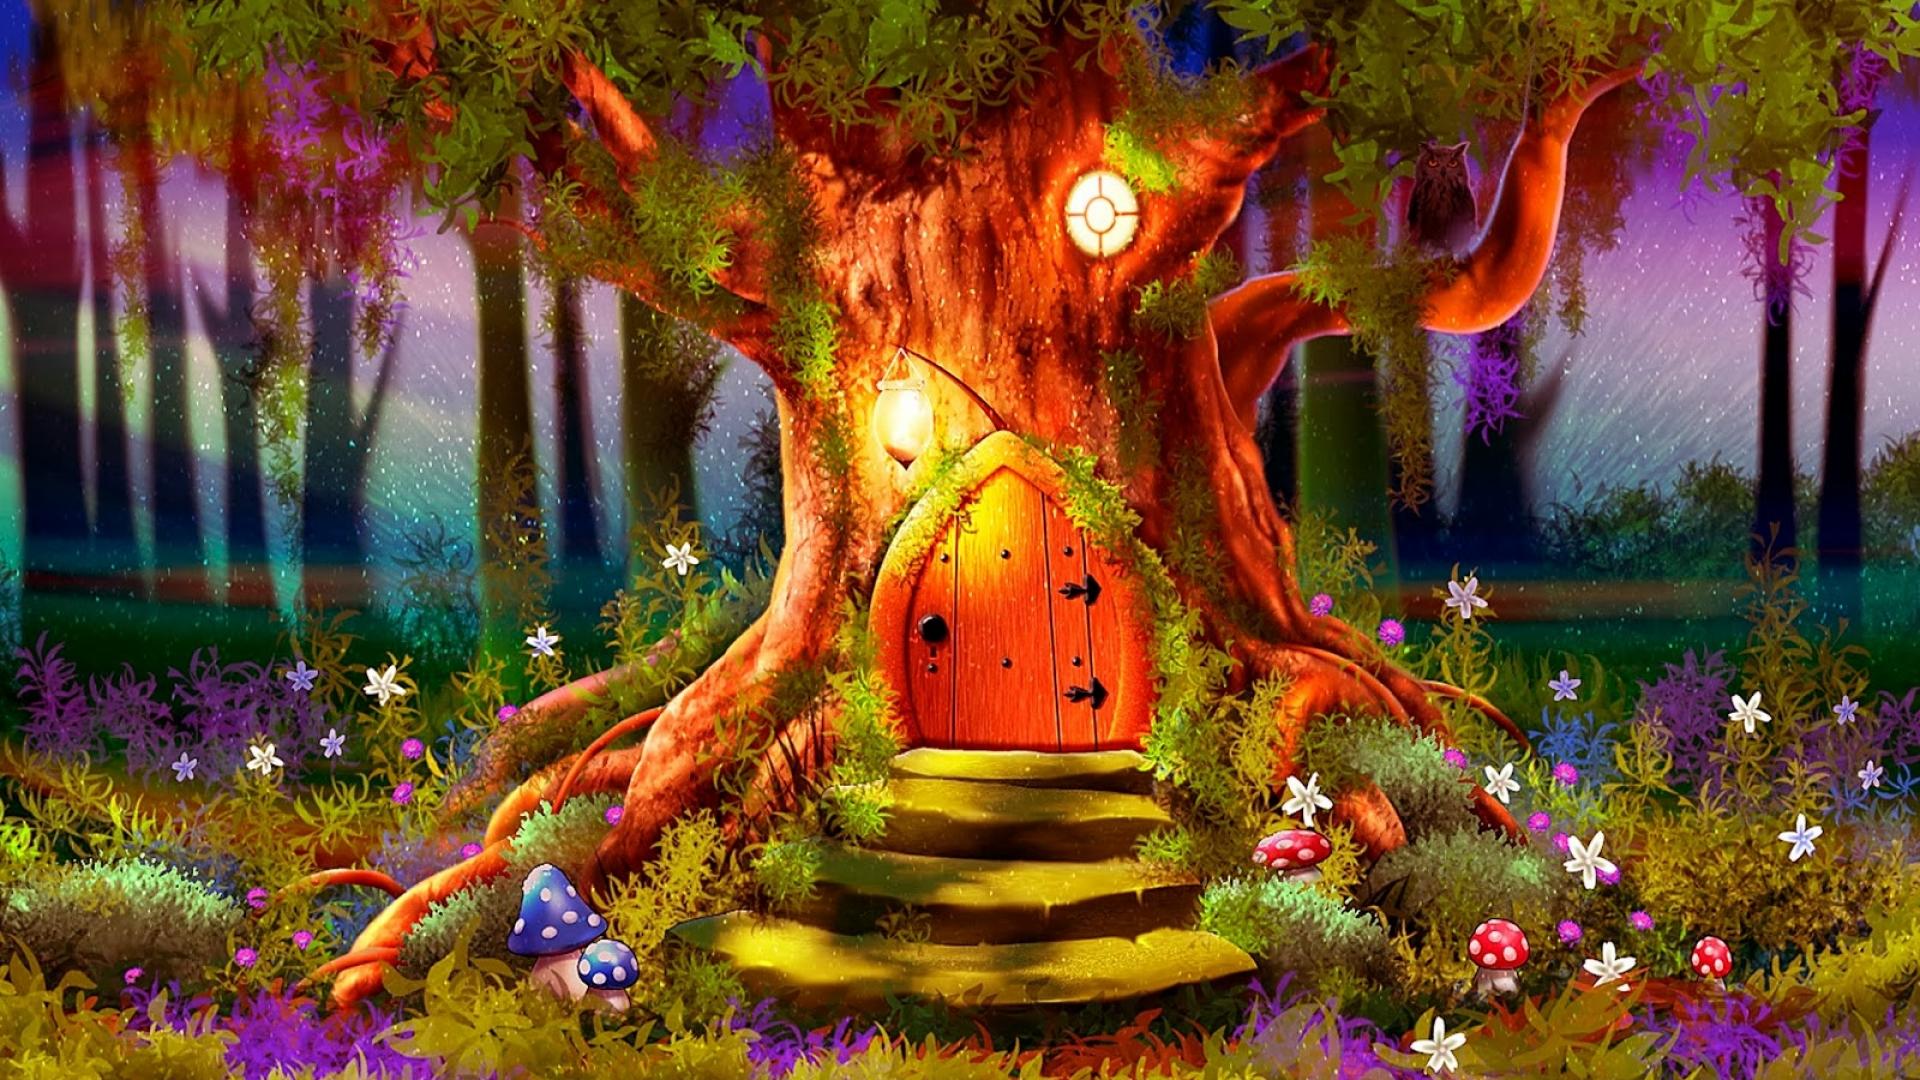 Magic Tree House Wallpapers - Wallpaper Cave